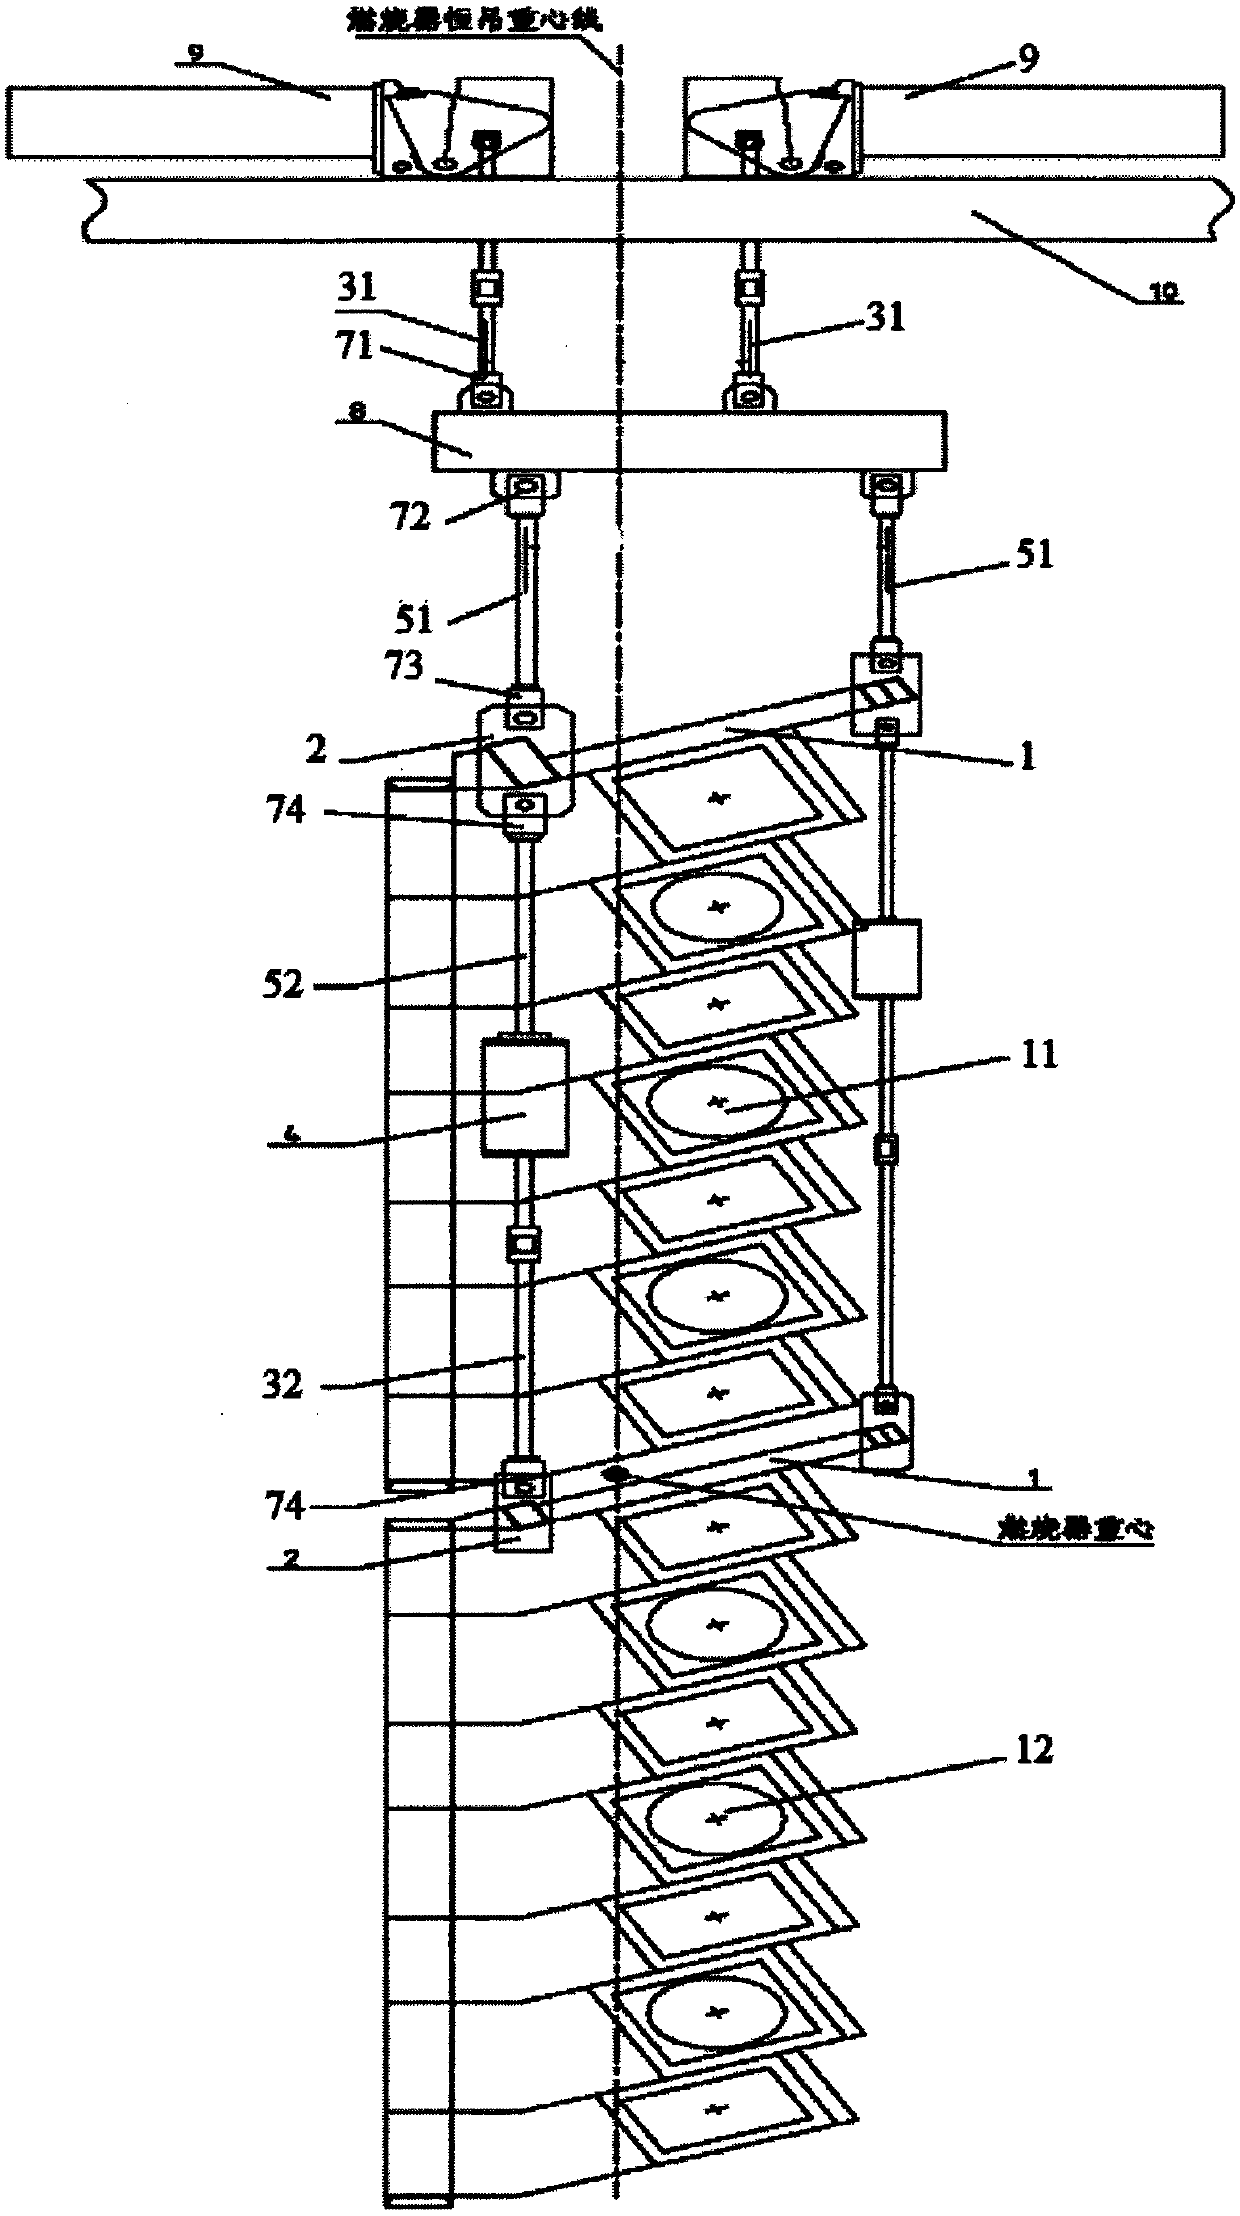 A device for balancing and suspending a burner with a double constant force spring hanger